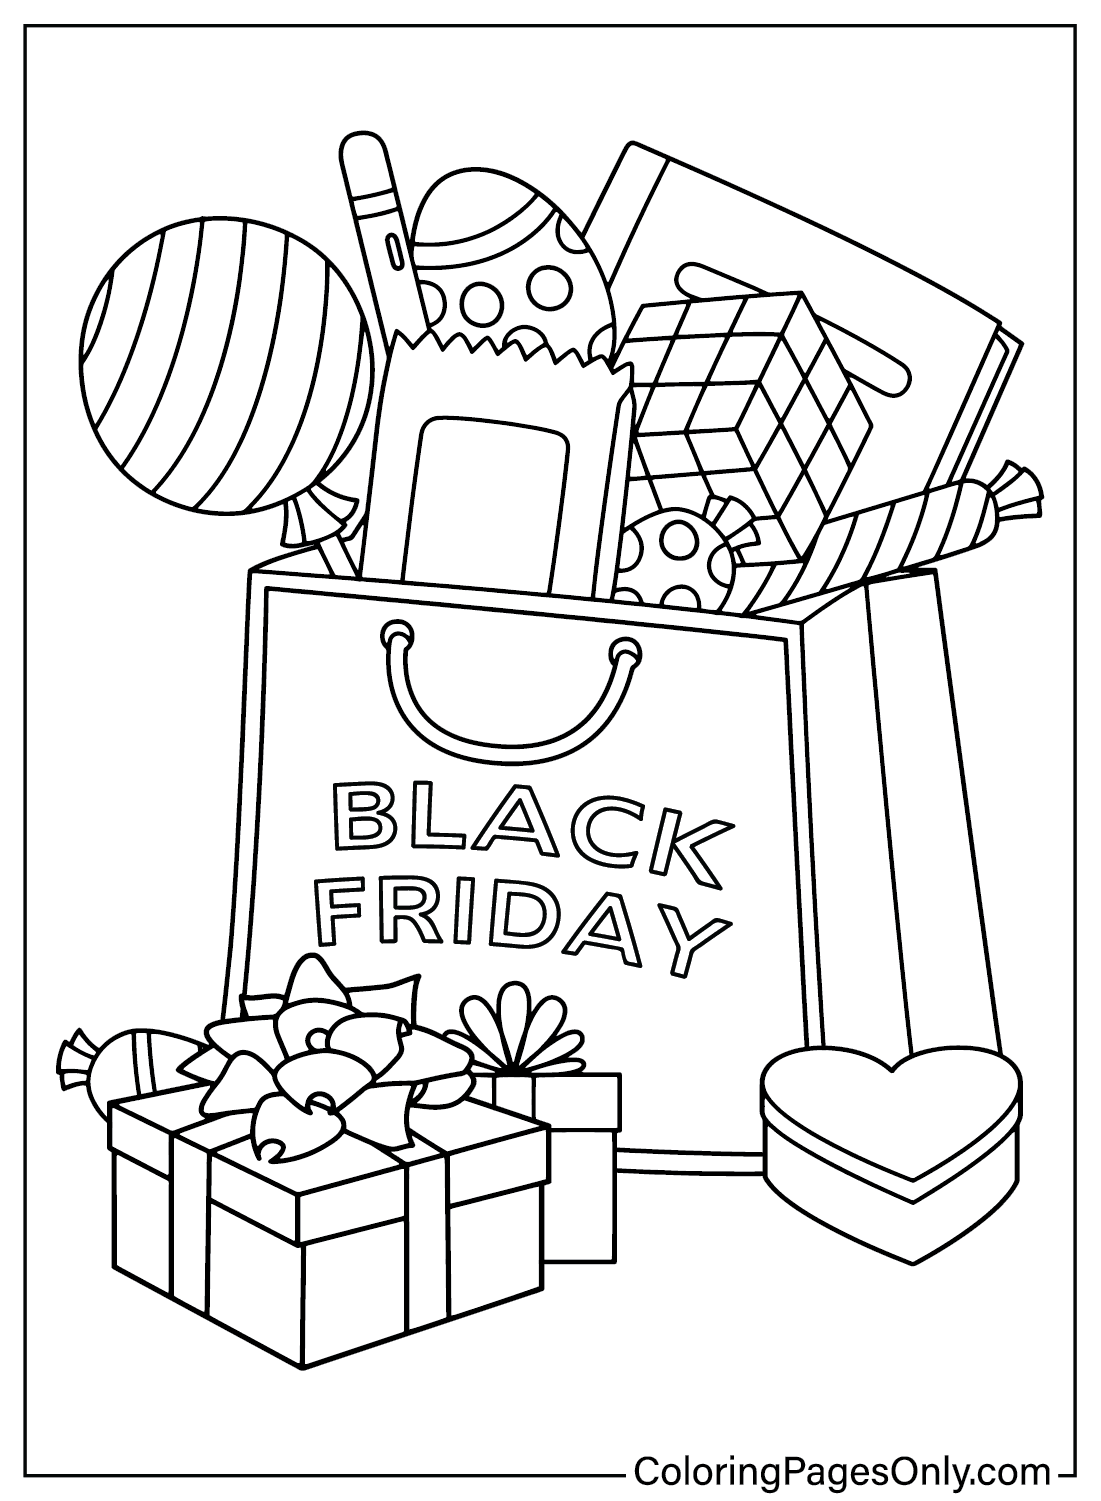 Black Friday Coloring Page Print from Black Friday